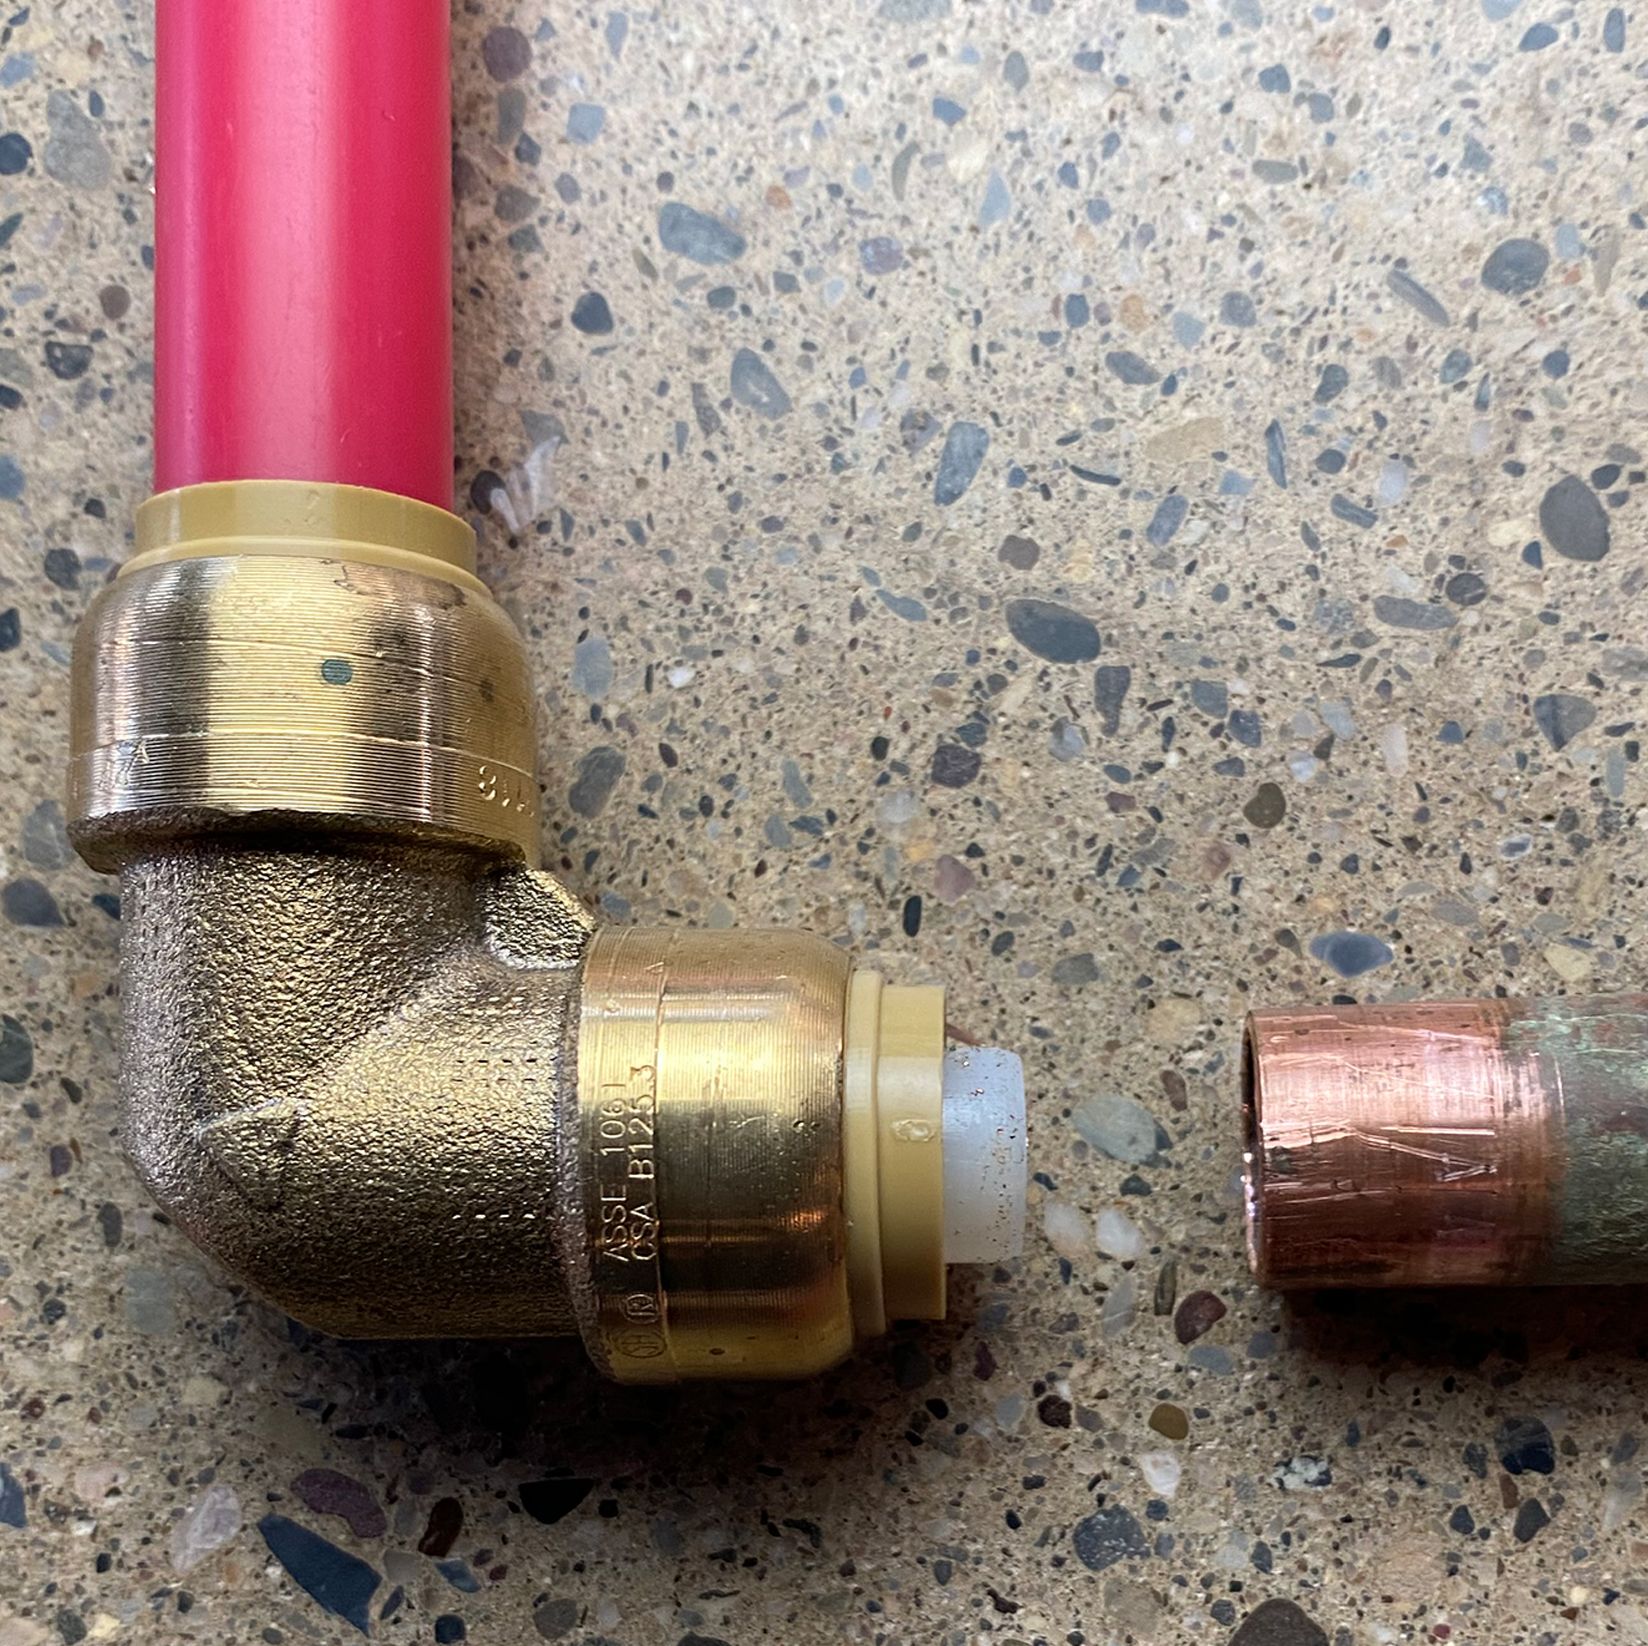 gator bites plumbing connectors to pvc pipes